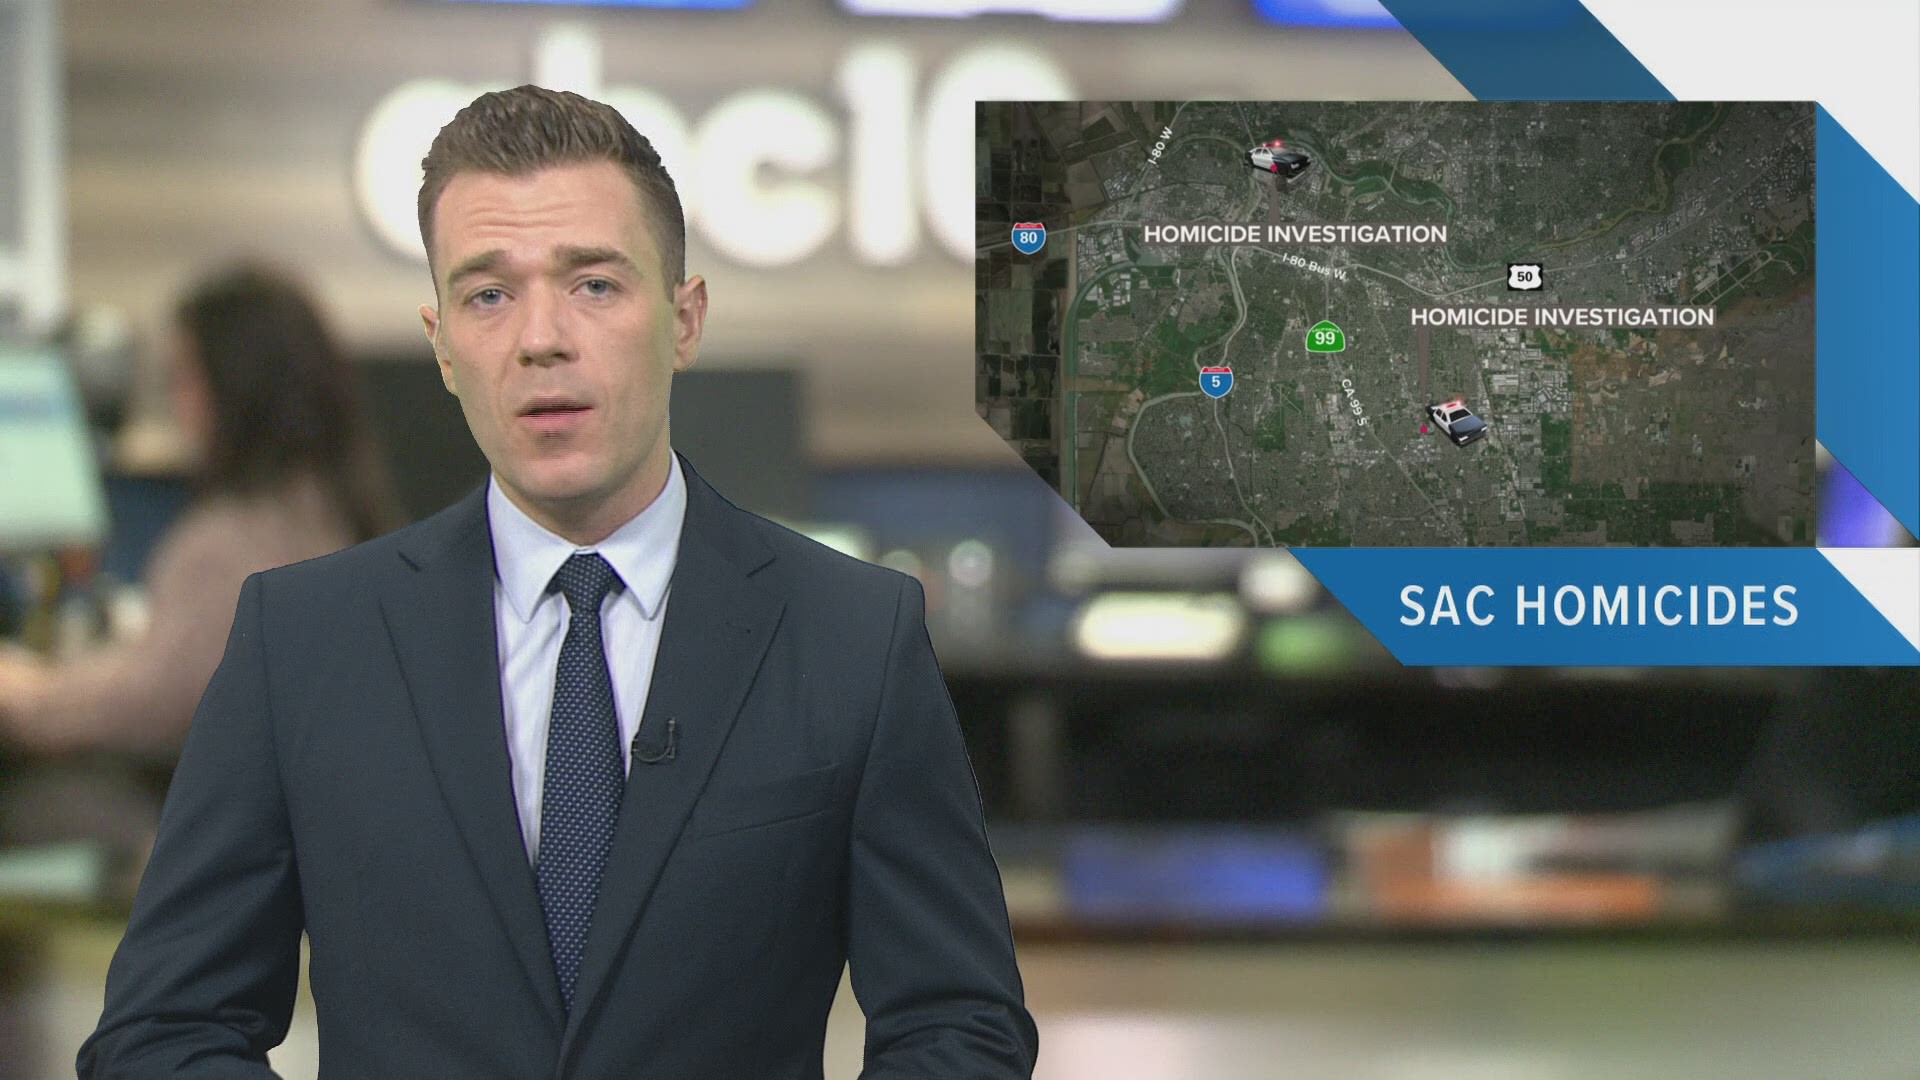 Evening Headlines: June 02, 2019 | Catch in-depth reporting on #LateNewsTonight at 11 p.m. | The latest Sacramento news is always at www.abc10.com